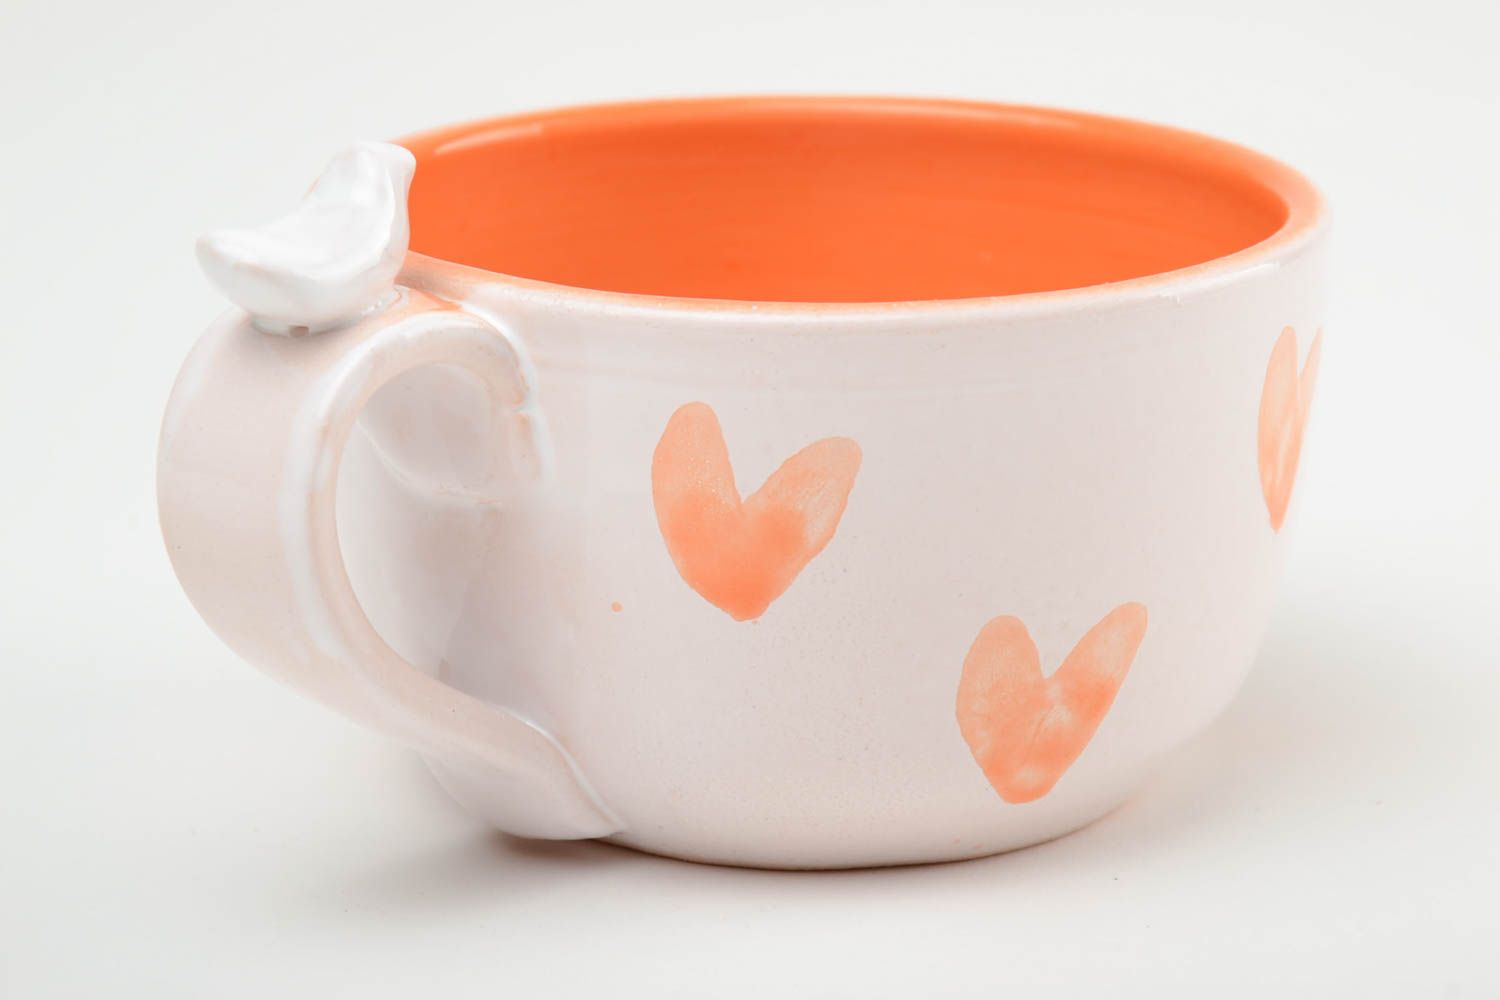 8 oz orange and white glazed ceramic teacup with a bird on handle and heart pattern photo 4